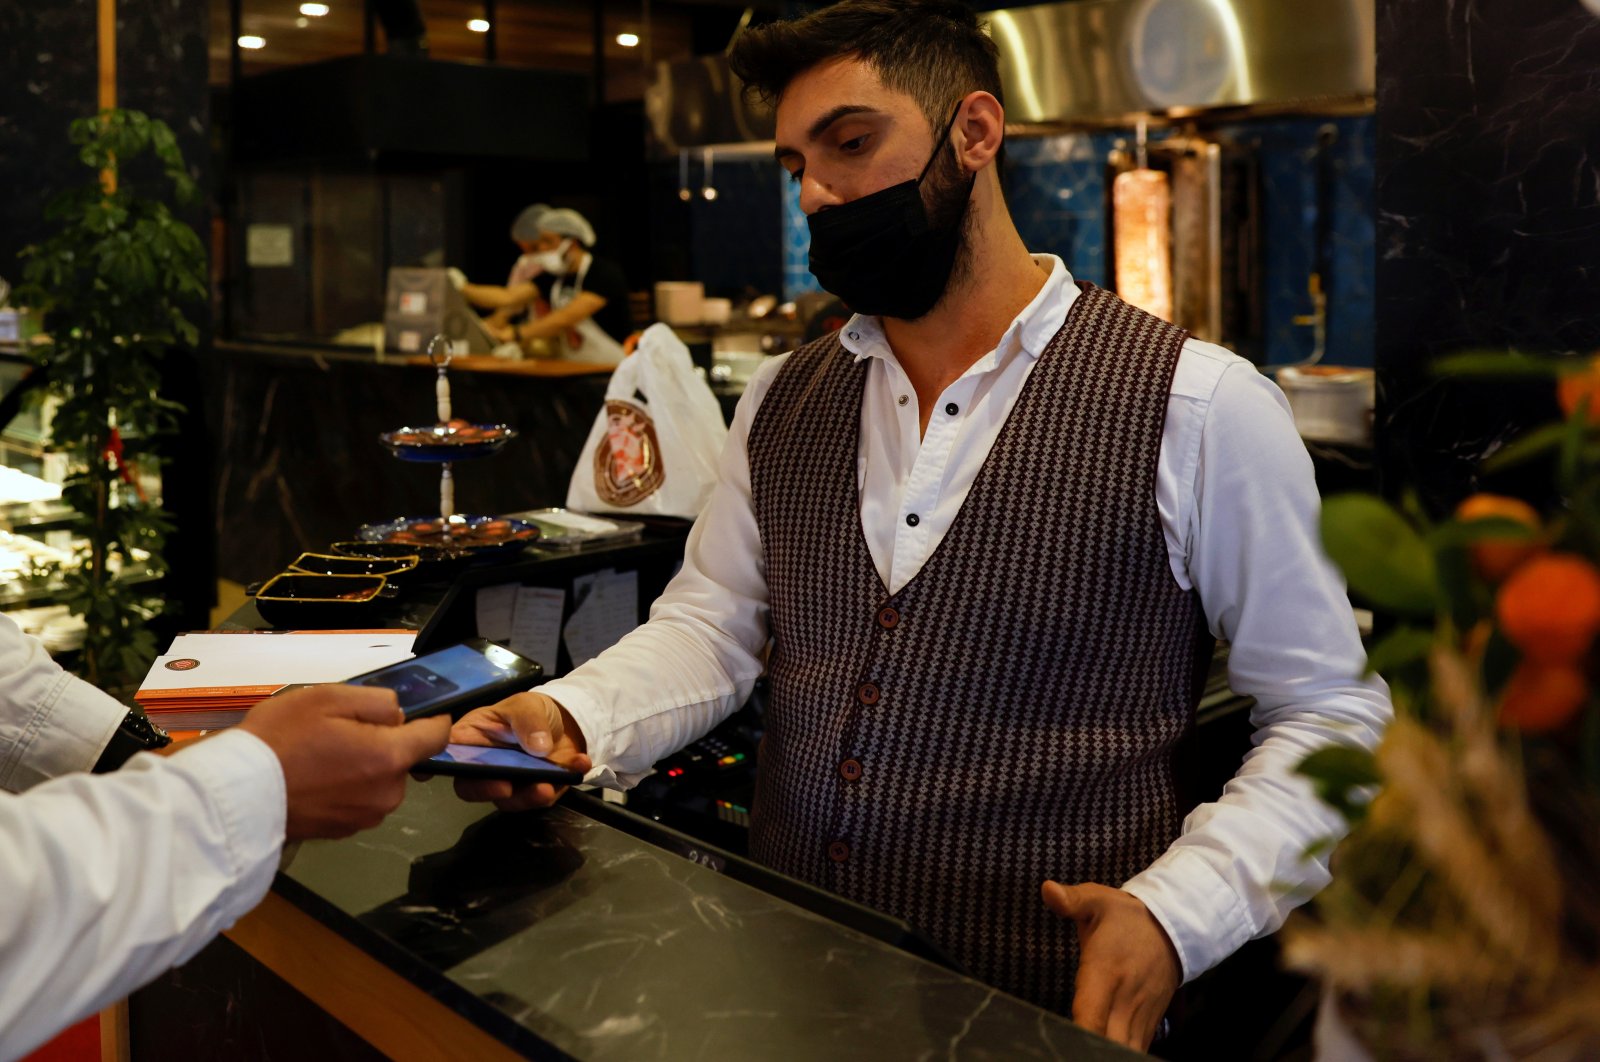 A cashier receives a payment at a restaurant in Istanbul, Türkiye, April 27, 2021. (Reuters Photo)